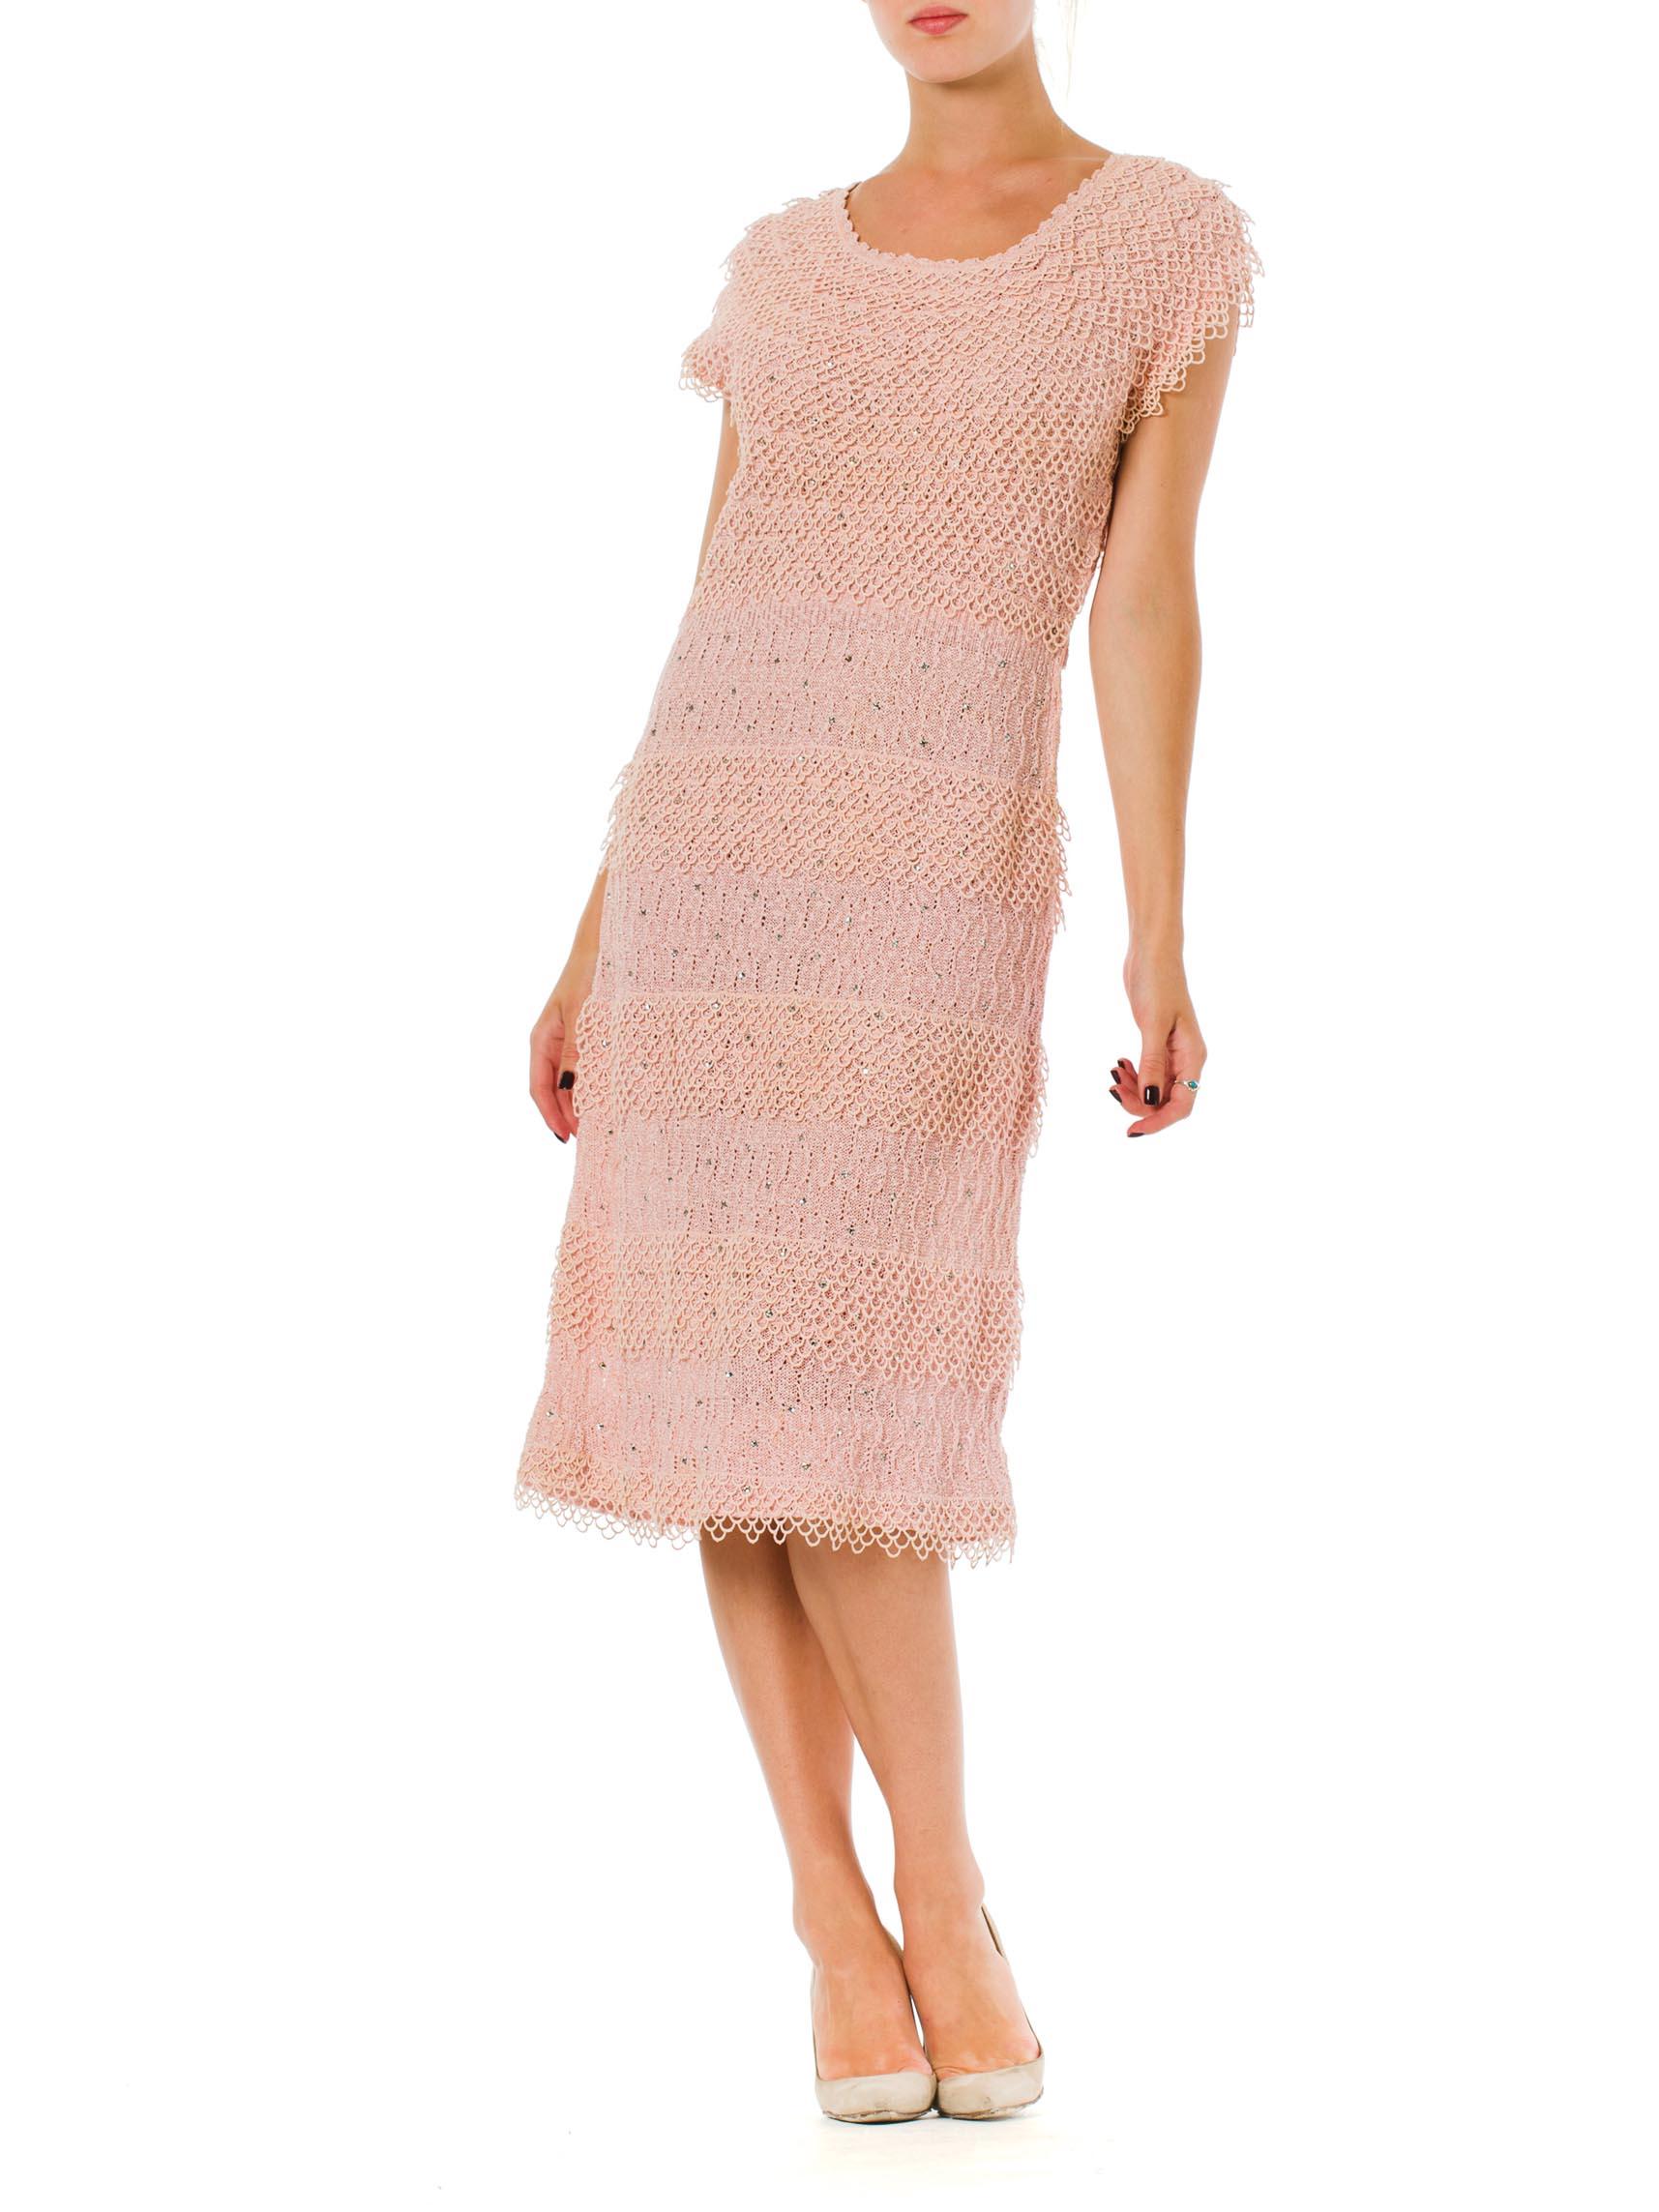 1950S Baby Pink Cotton Blend Knit Wiggle Dress With Scalloped Lace & Crystals For Sale 7